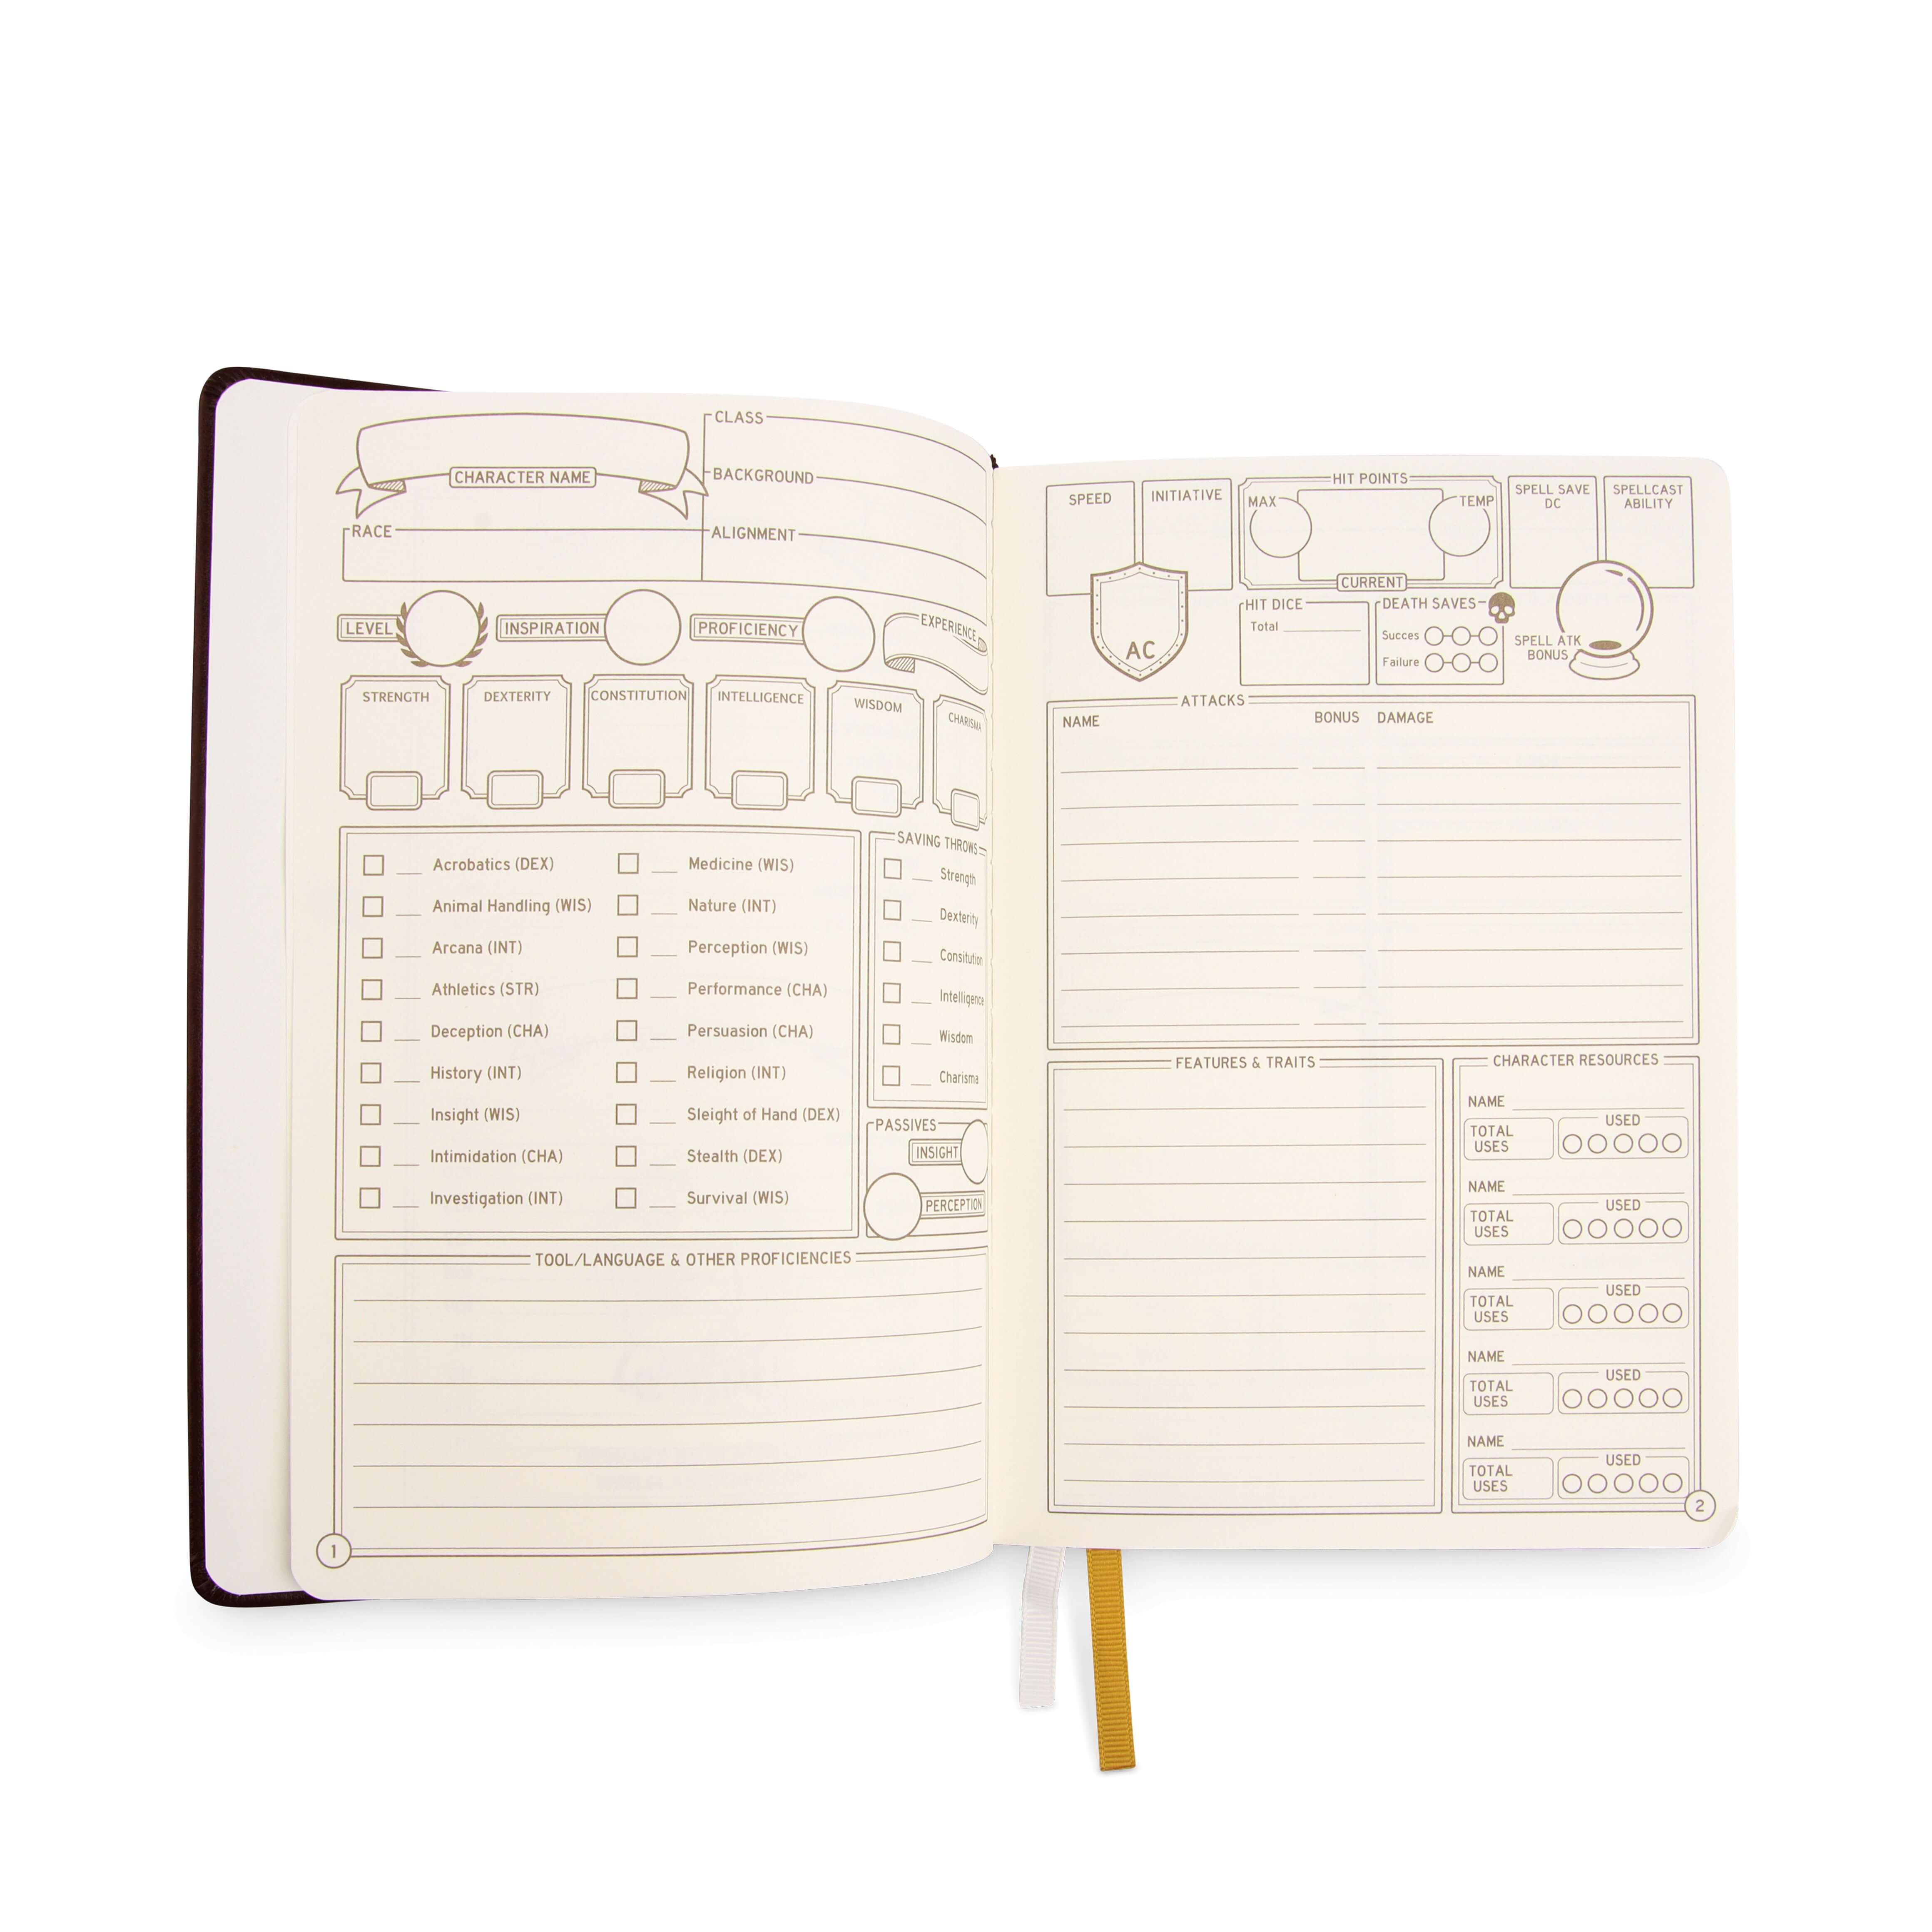 DnD 5e Player Journal - Ultimate character sheet journal for Fifth edition - Glassstaff